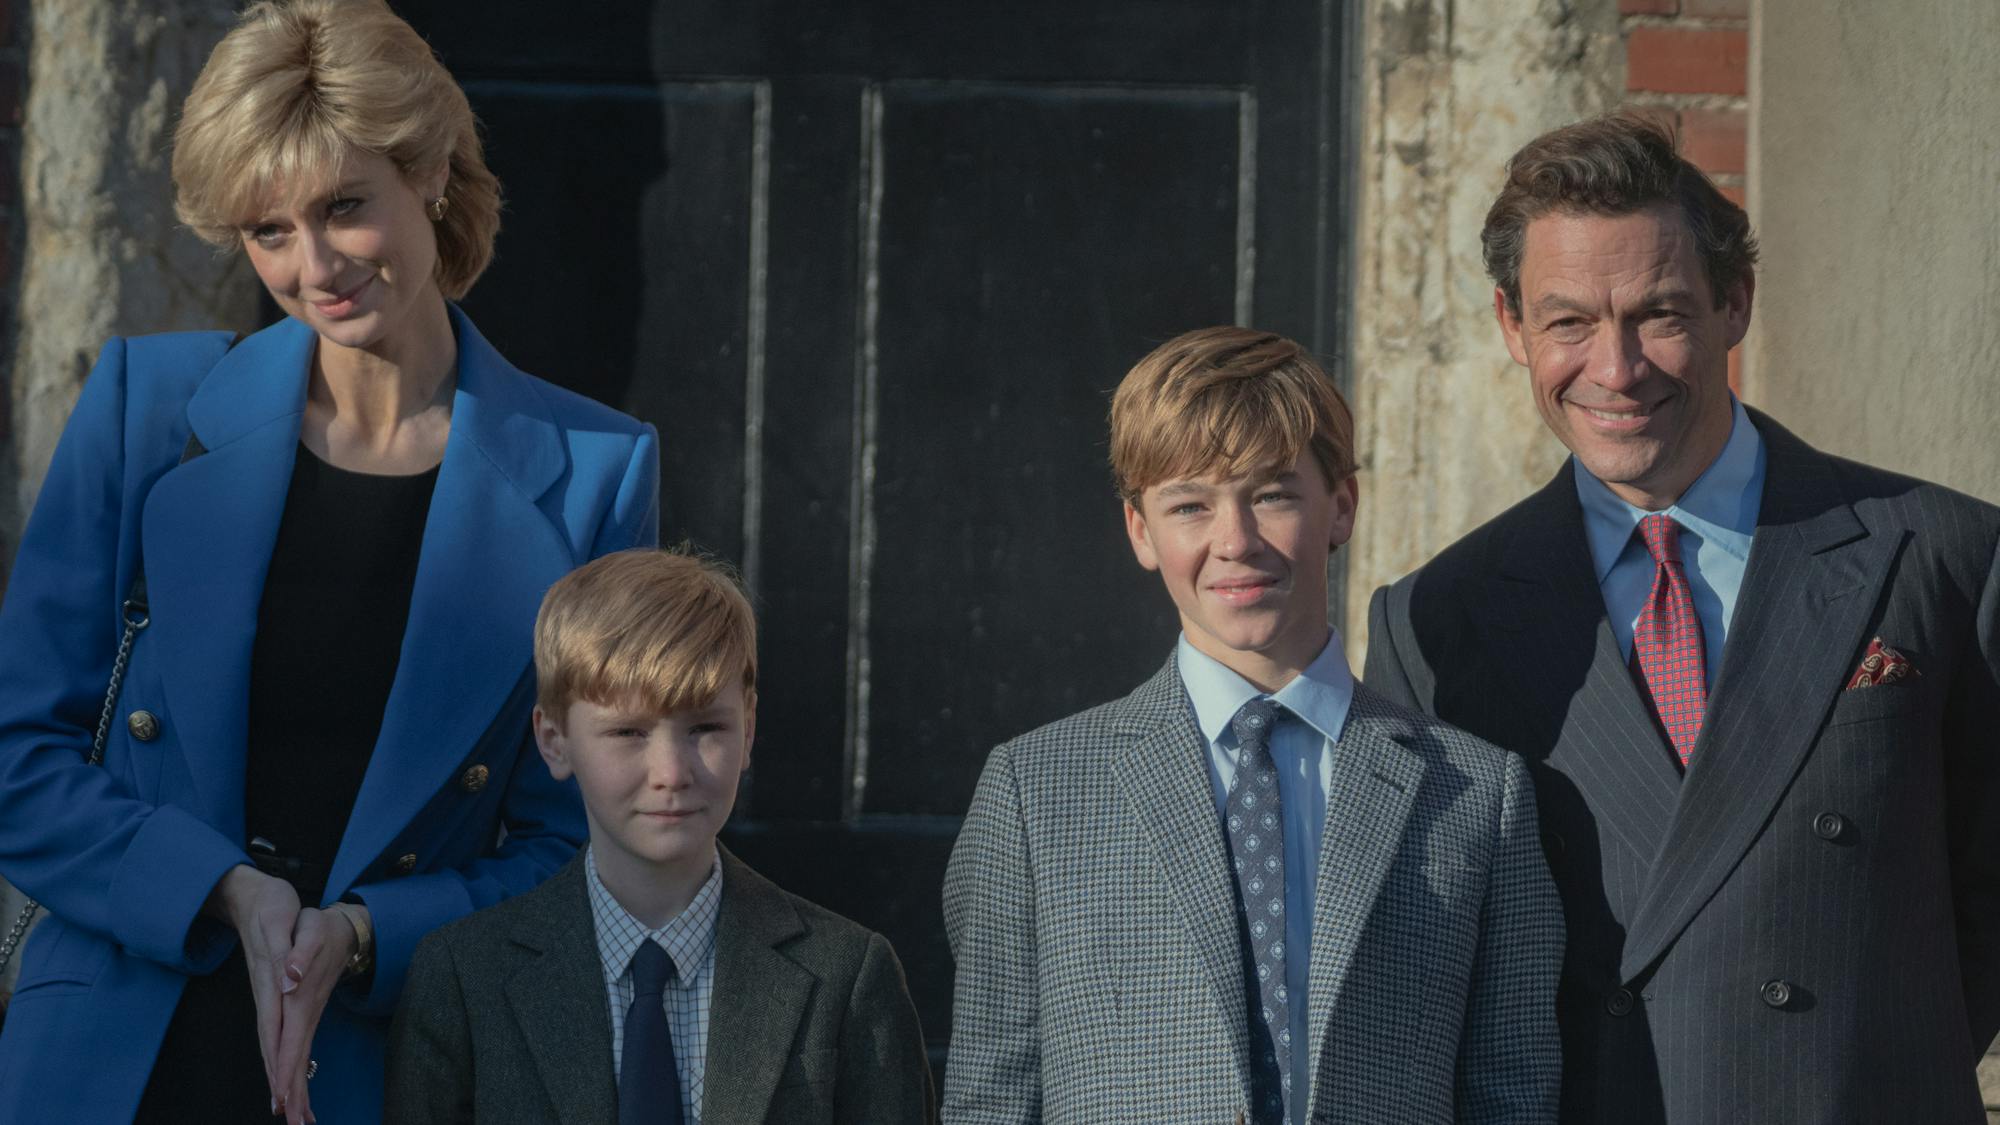 Princess Diana (Elizabeth Debicki), Prince Harry (Will Powell), Prince William (Senan West), and Prince Charles (Dominic West) stand together smiling slightly. Diana wears a blue jacket, and the boys wear navy ties and checkered jackets. Charles wears a double breasted jacket and red tie.